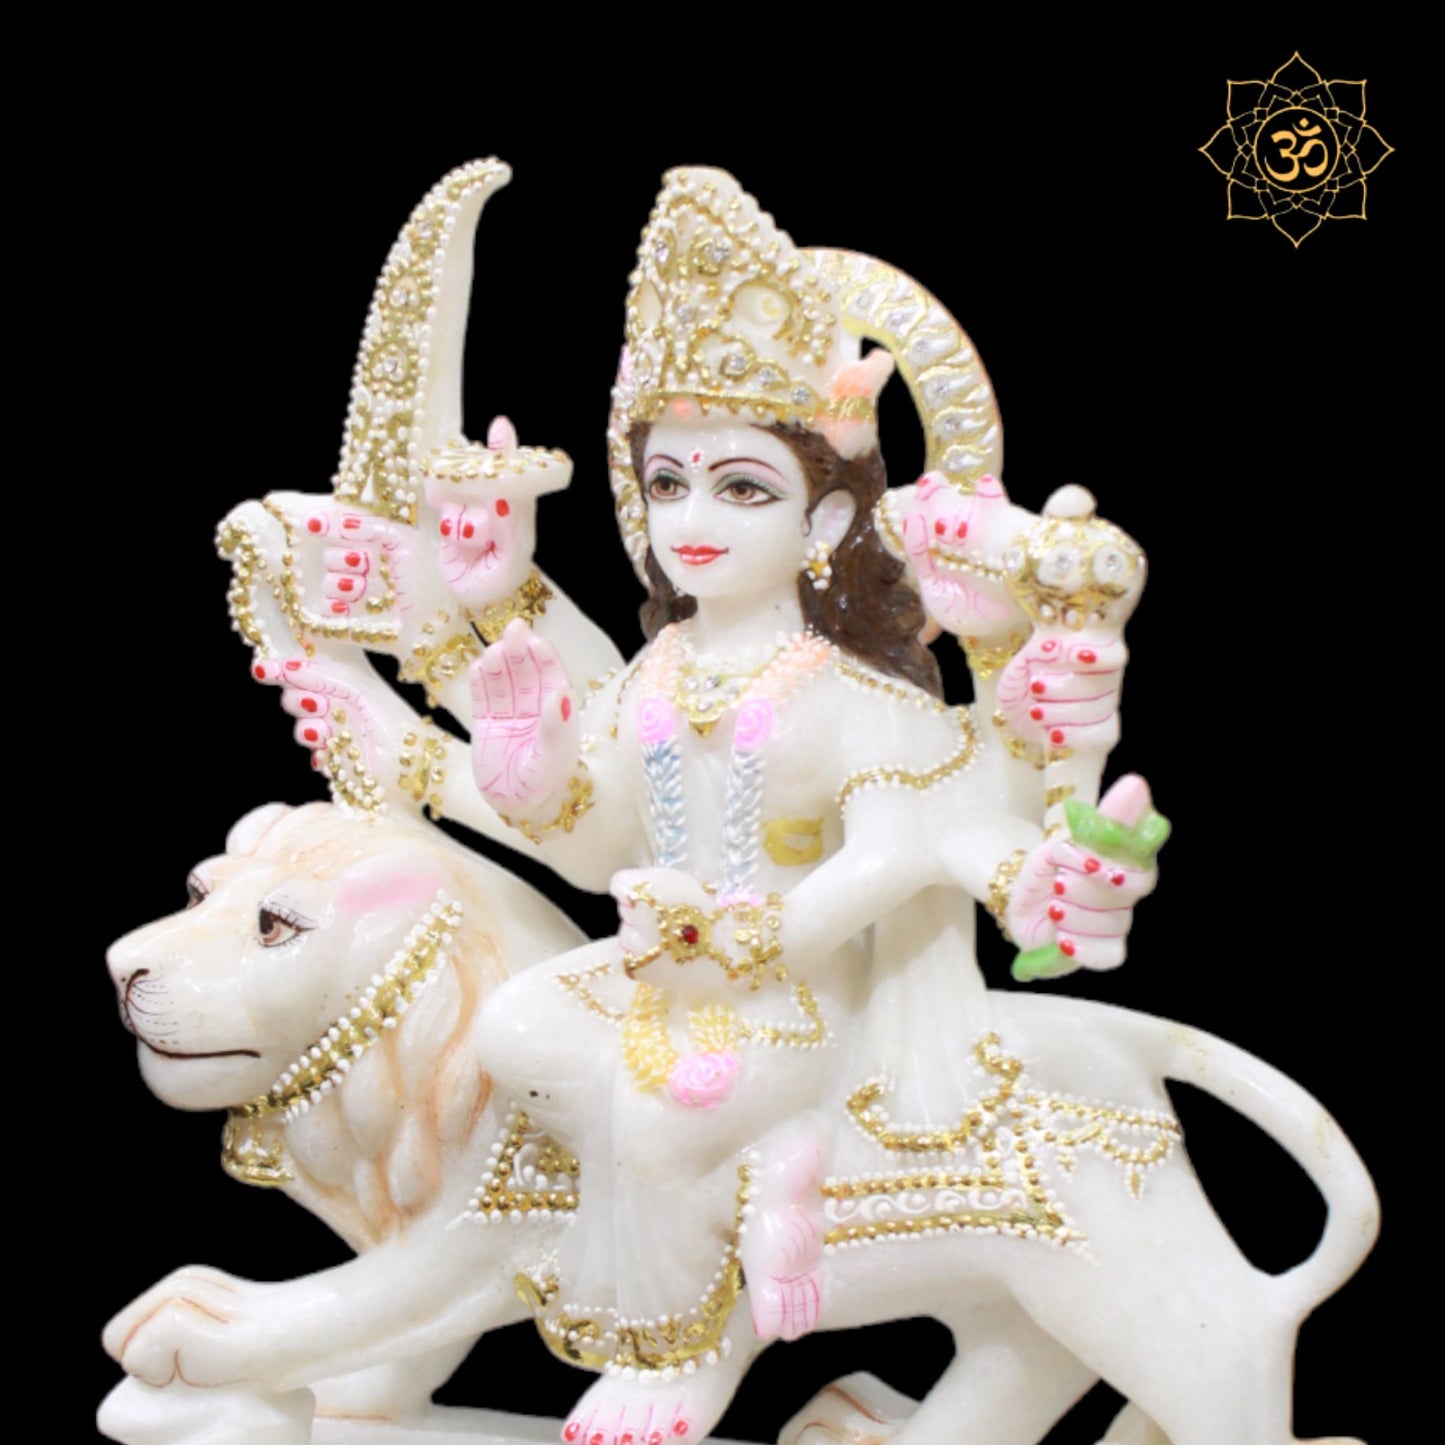 Durga Marble Murti in 12inches sitting on Lion with Diamond Work